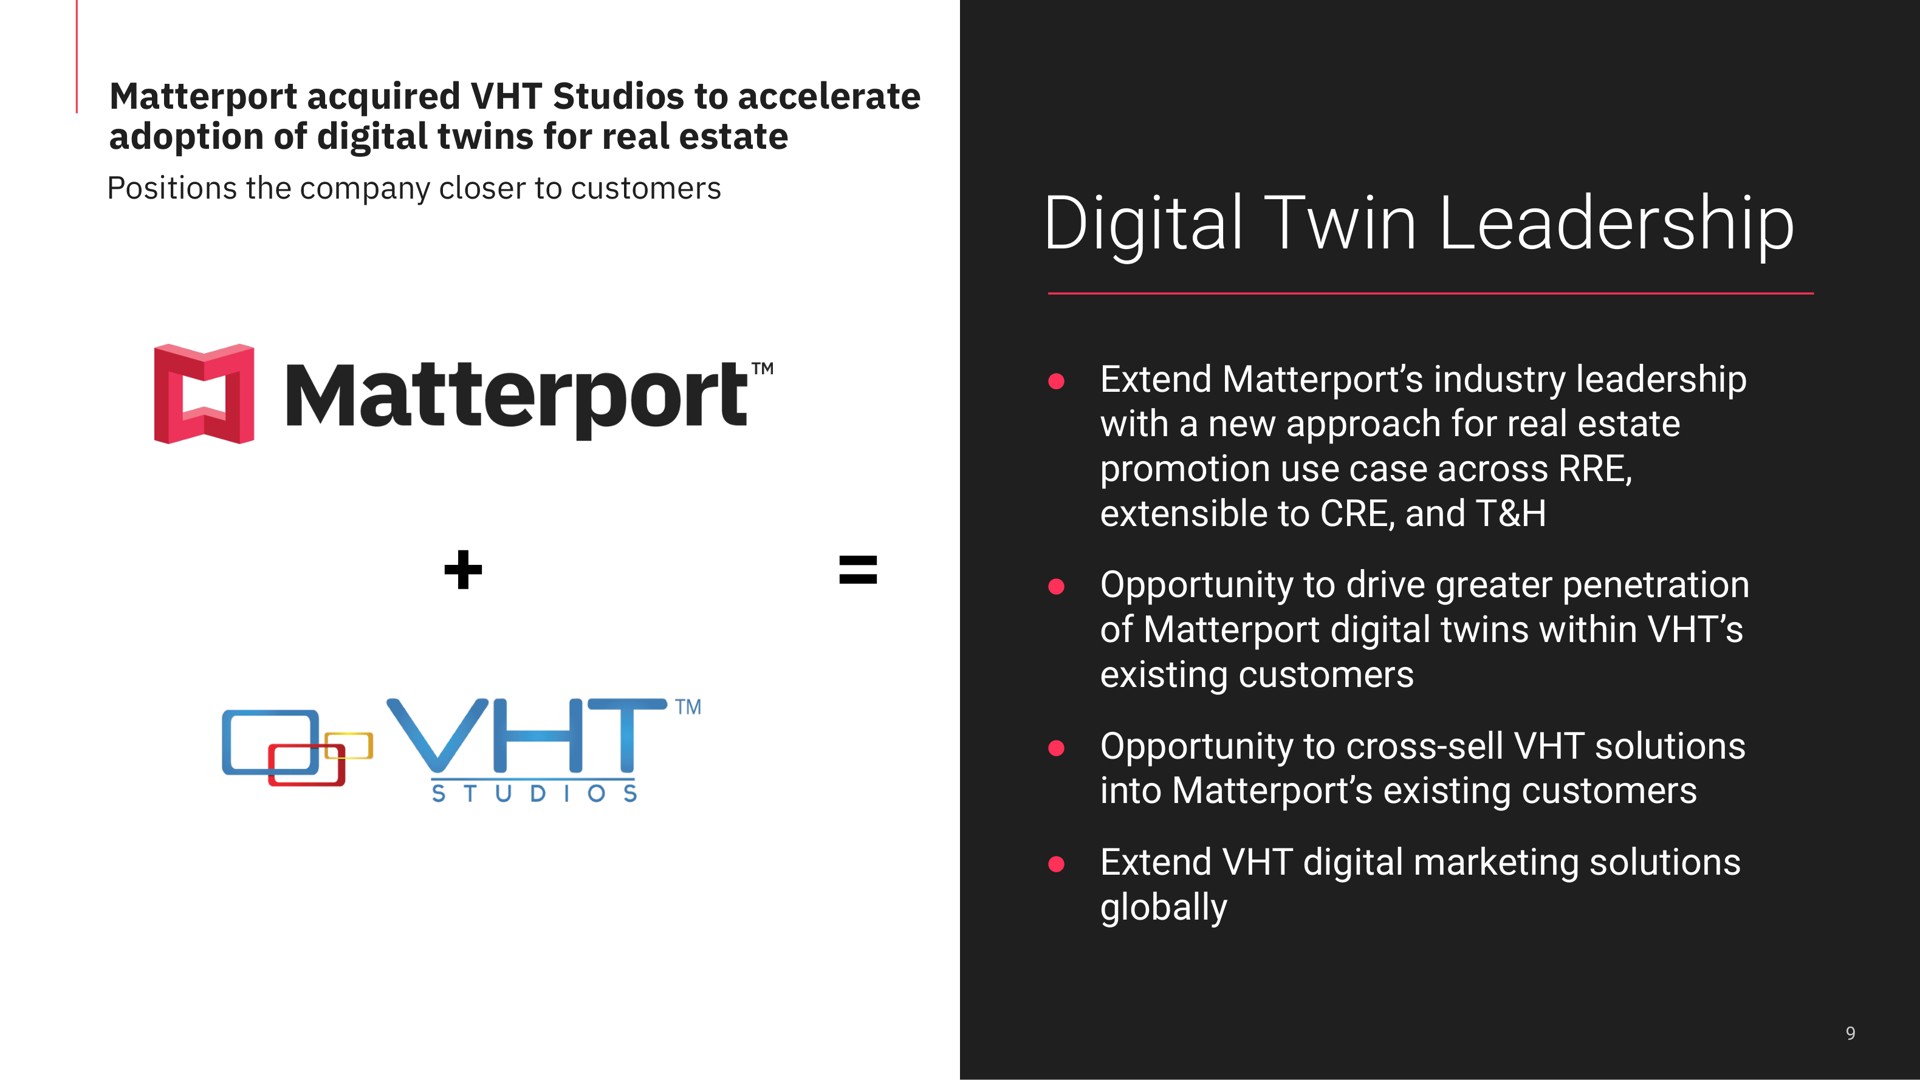 acquired studios to accelerate adoption of digital twins for real estate digital twin leadership extend industry leadership with a new approach for real estate promotion use case across extensible to and opportunity to drive greater penetration of digital twins within existing customers opportunity to cross sell solutions into existing customers extend digital marketing solutions globally | Matterport